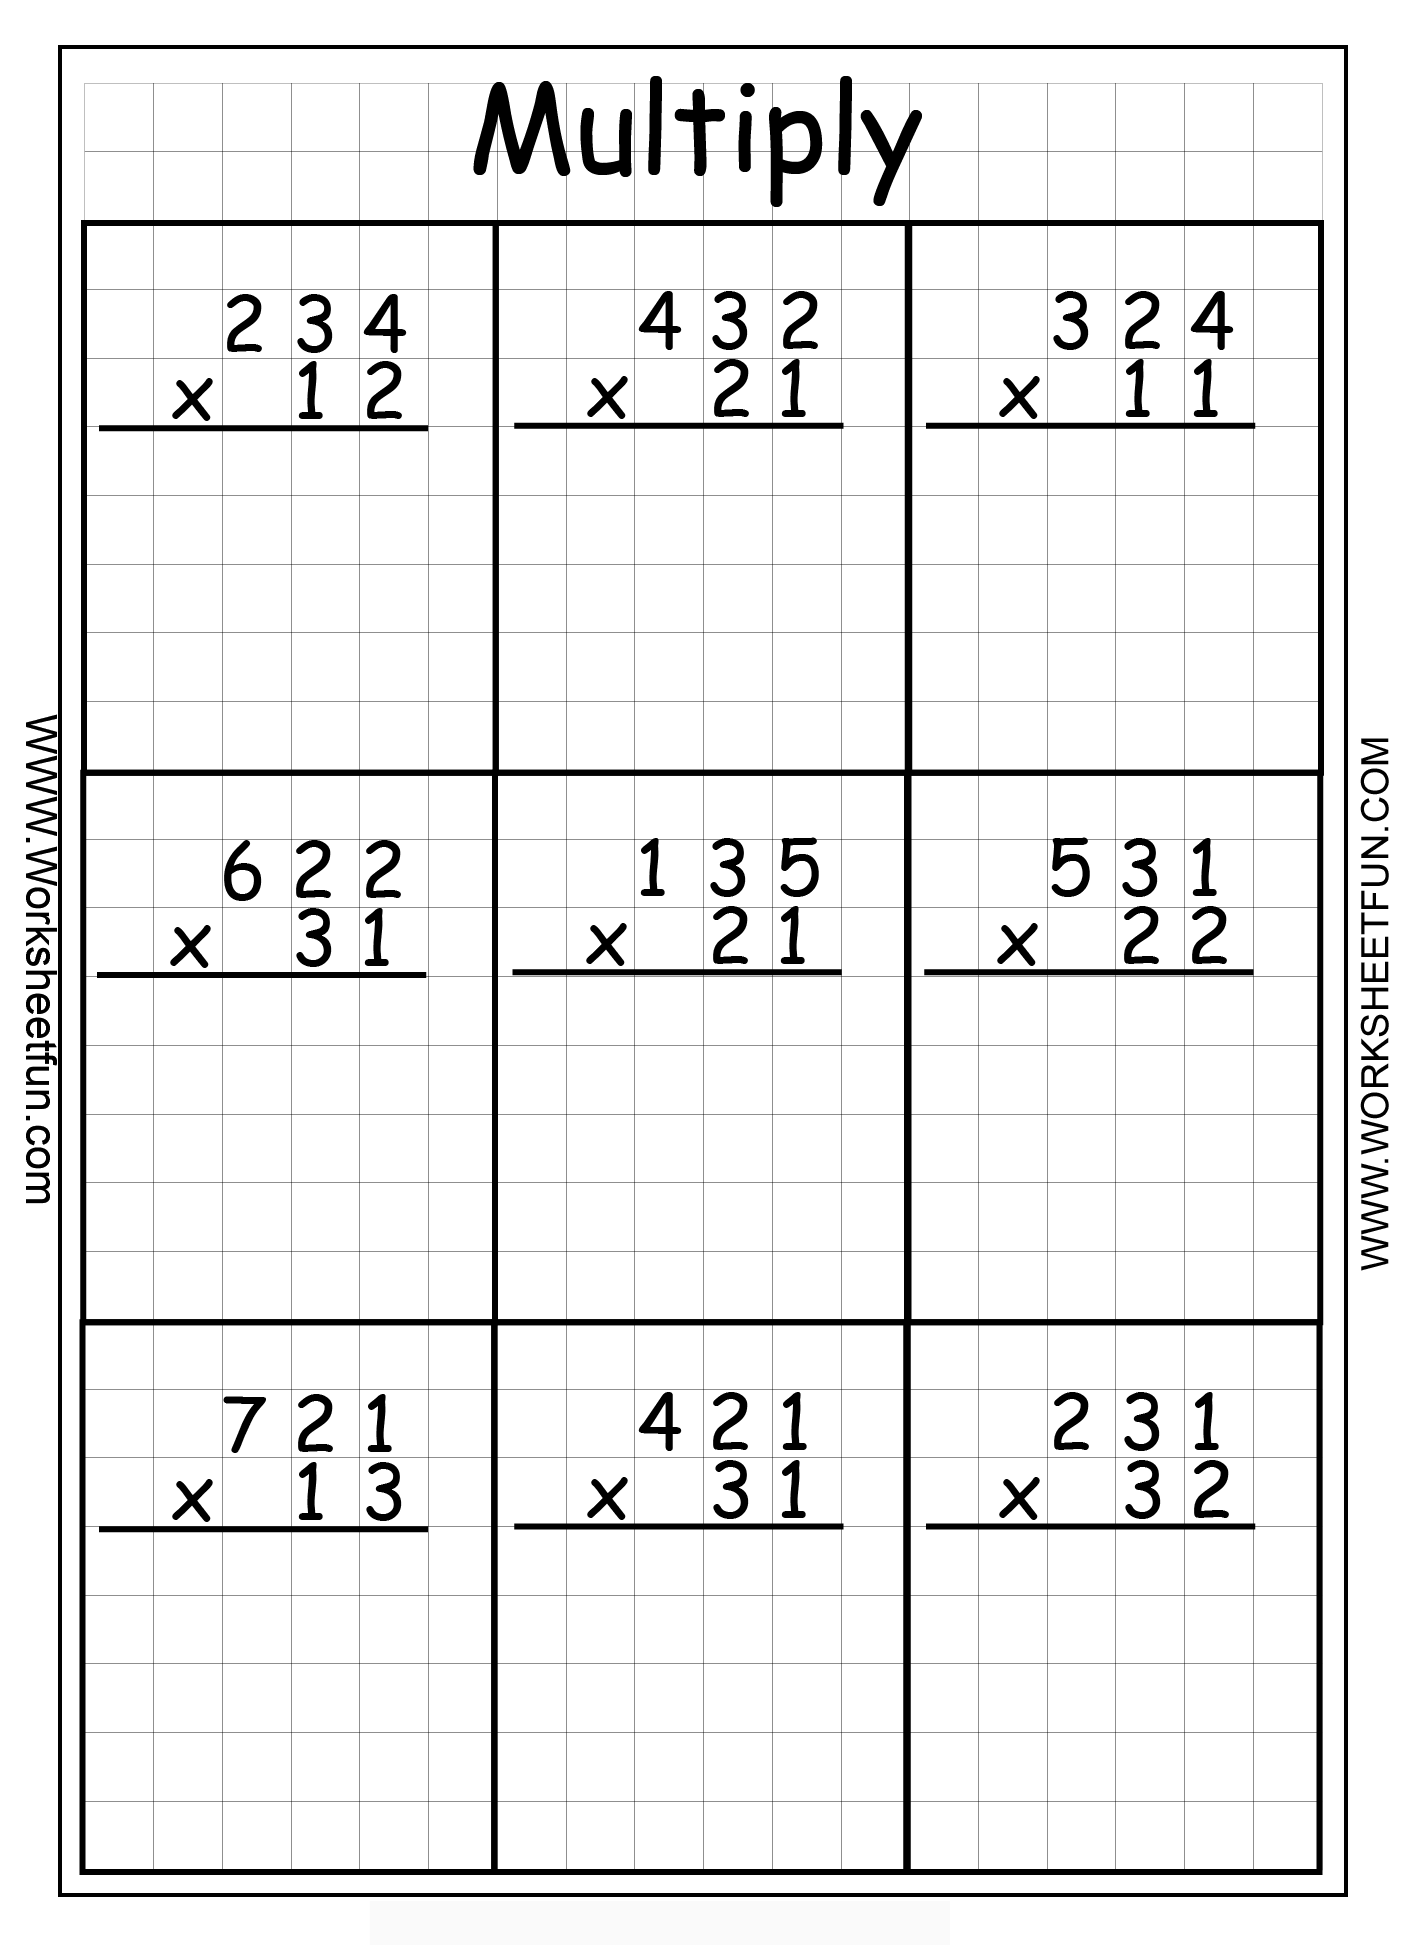 free-multiply-by-3-worksheets